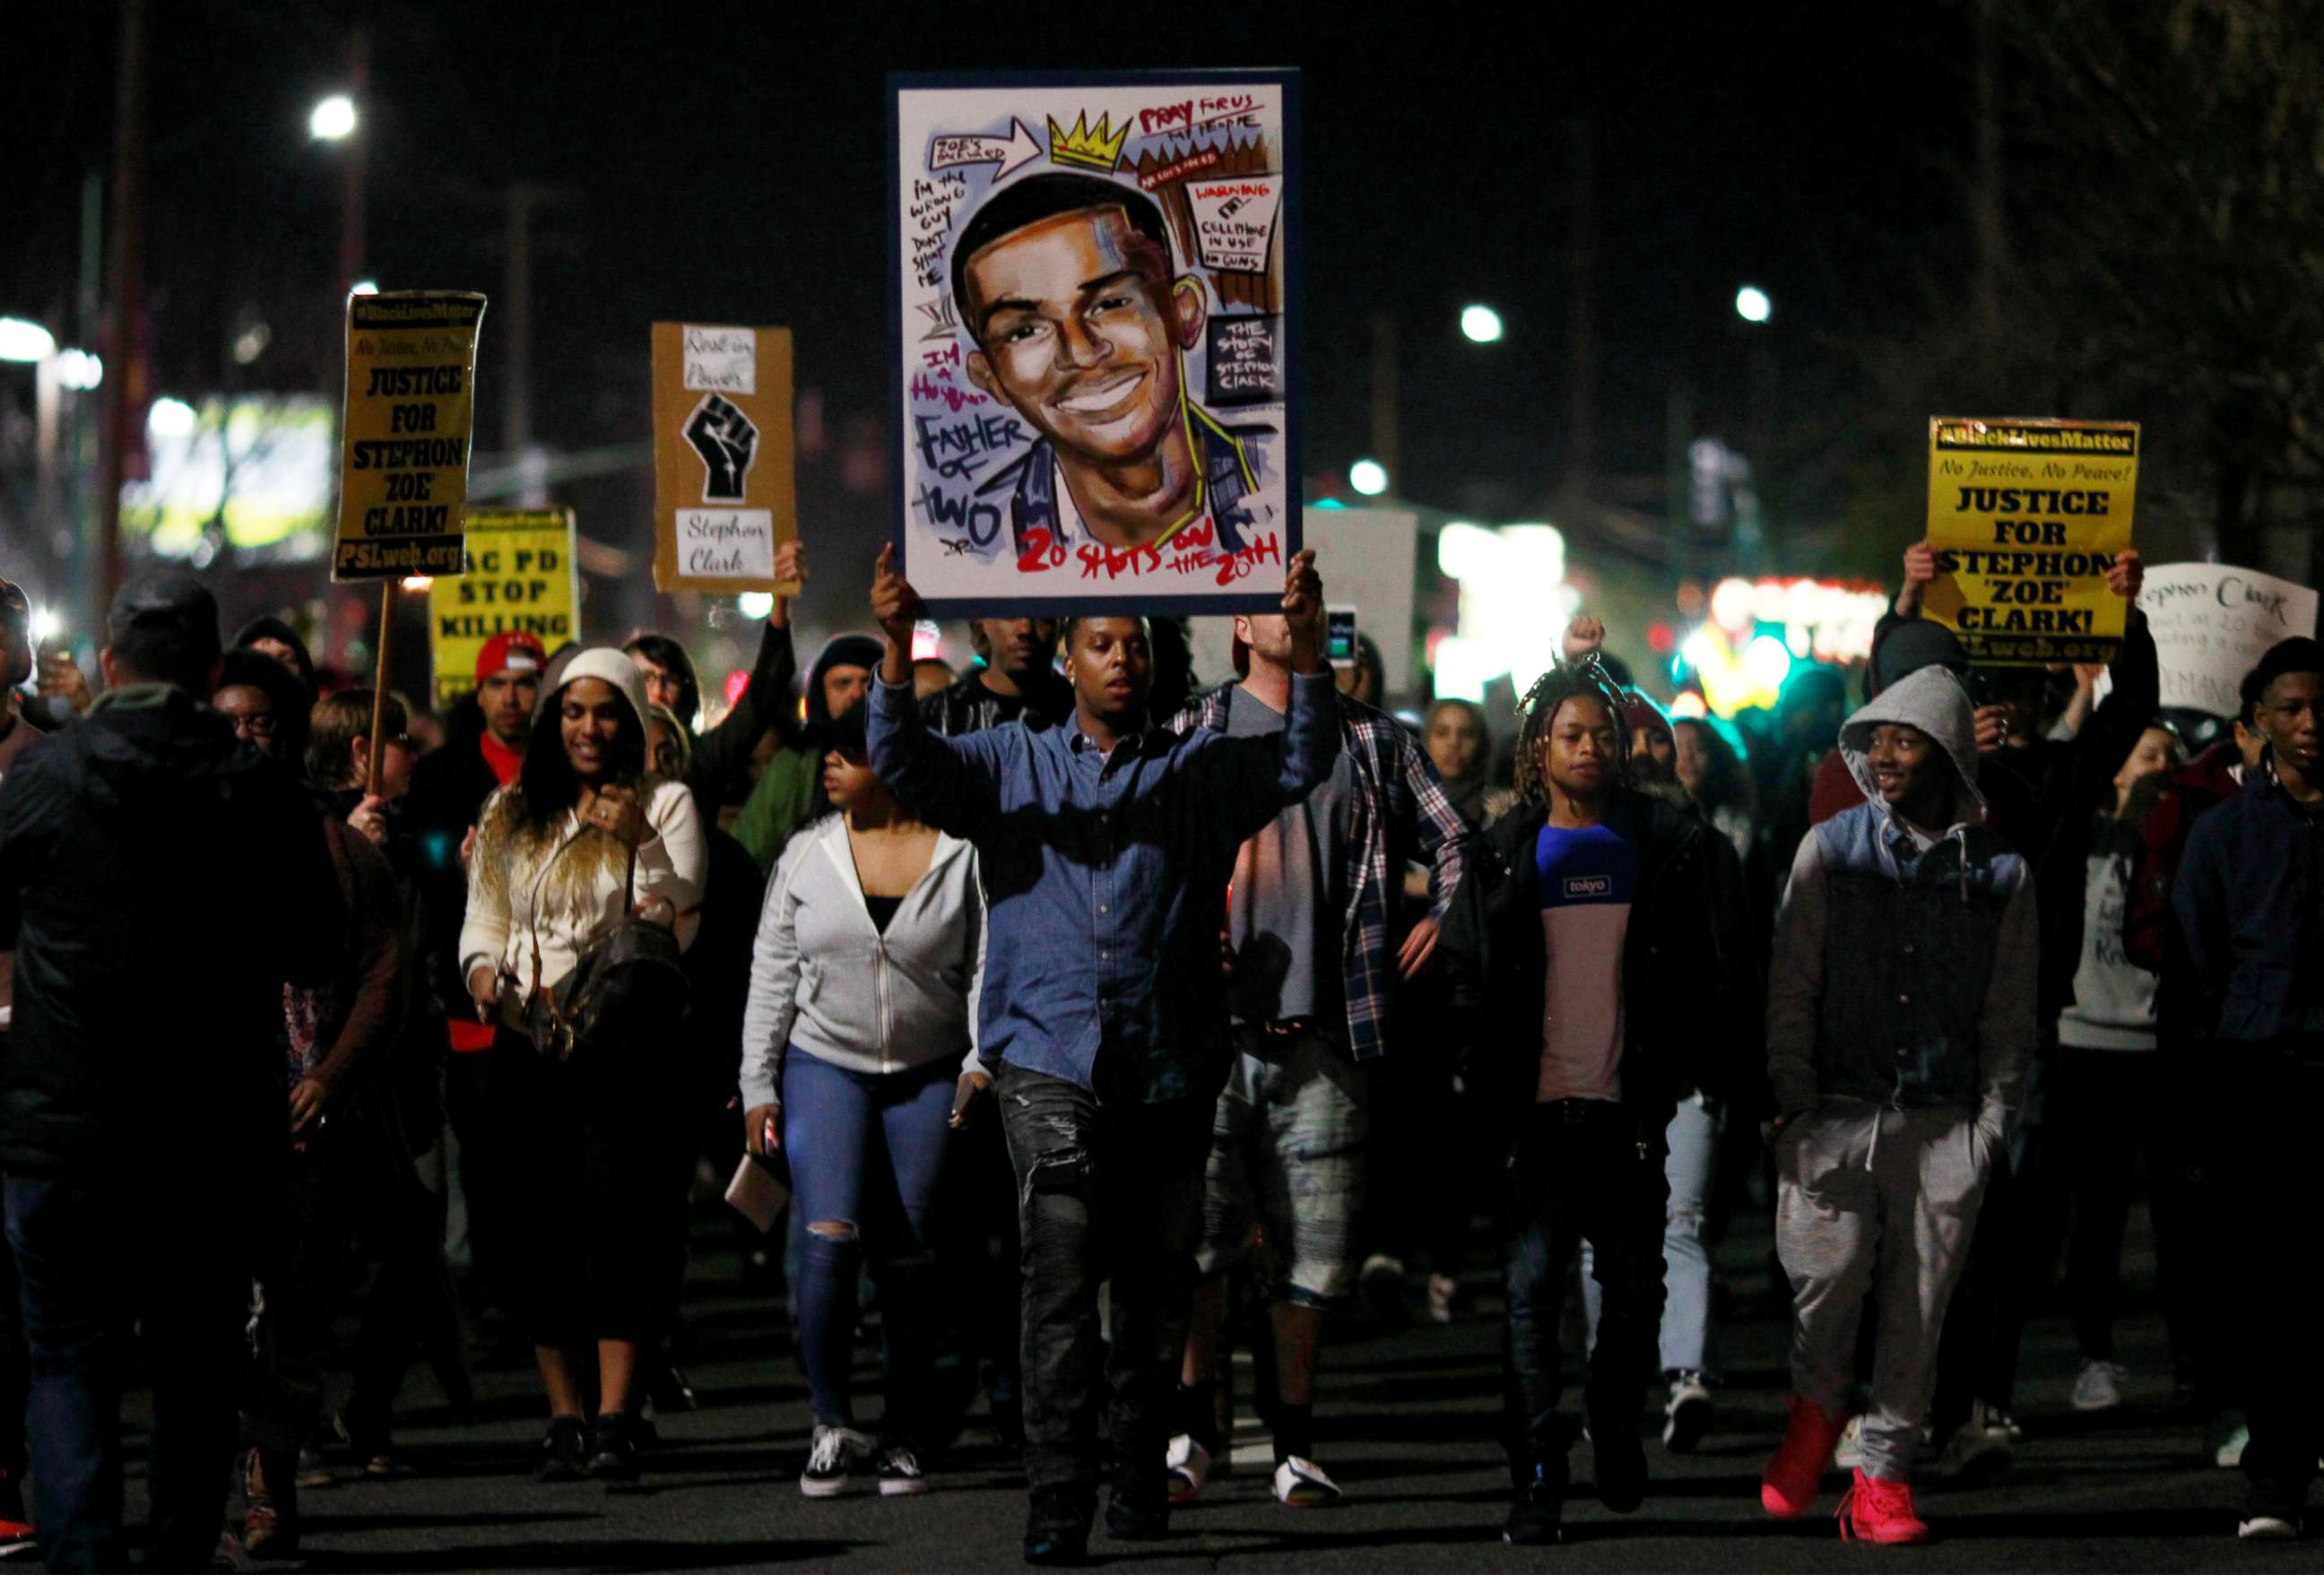 PHOTO: Demonstrators march to protest the police shooting of Stephon Clark, in Sacramento, Calif., March 23, 2018.